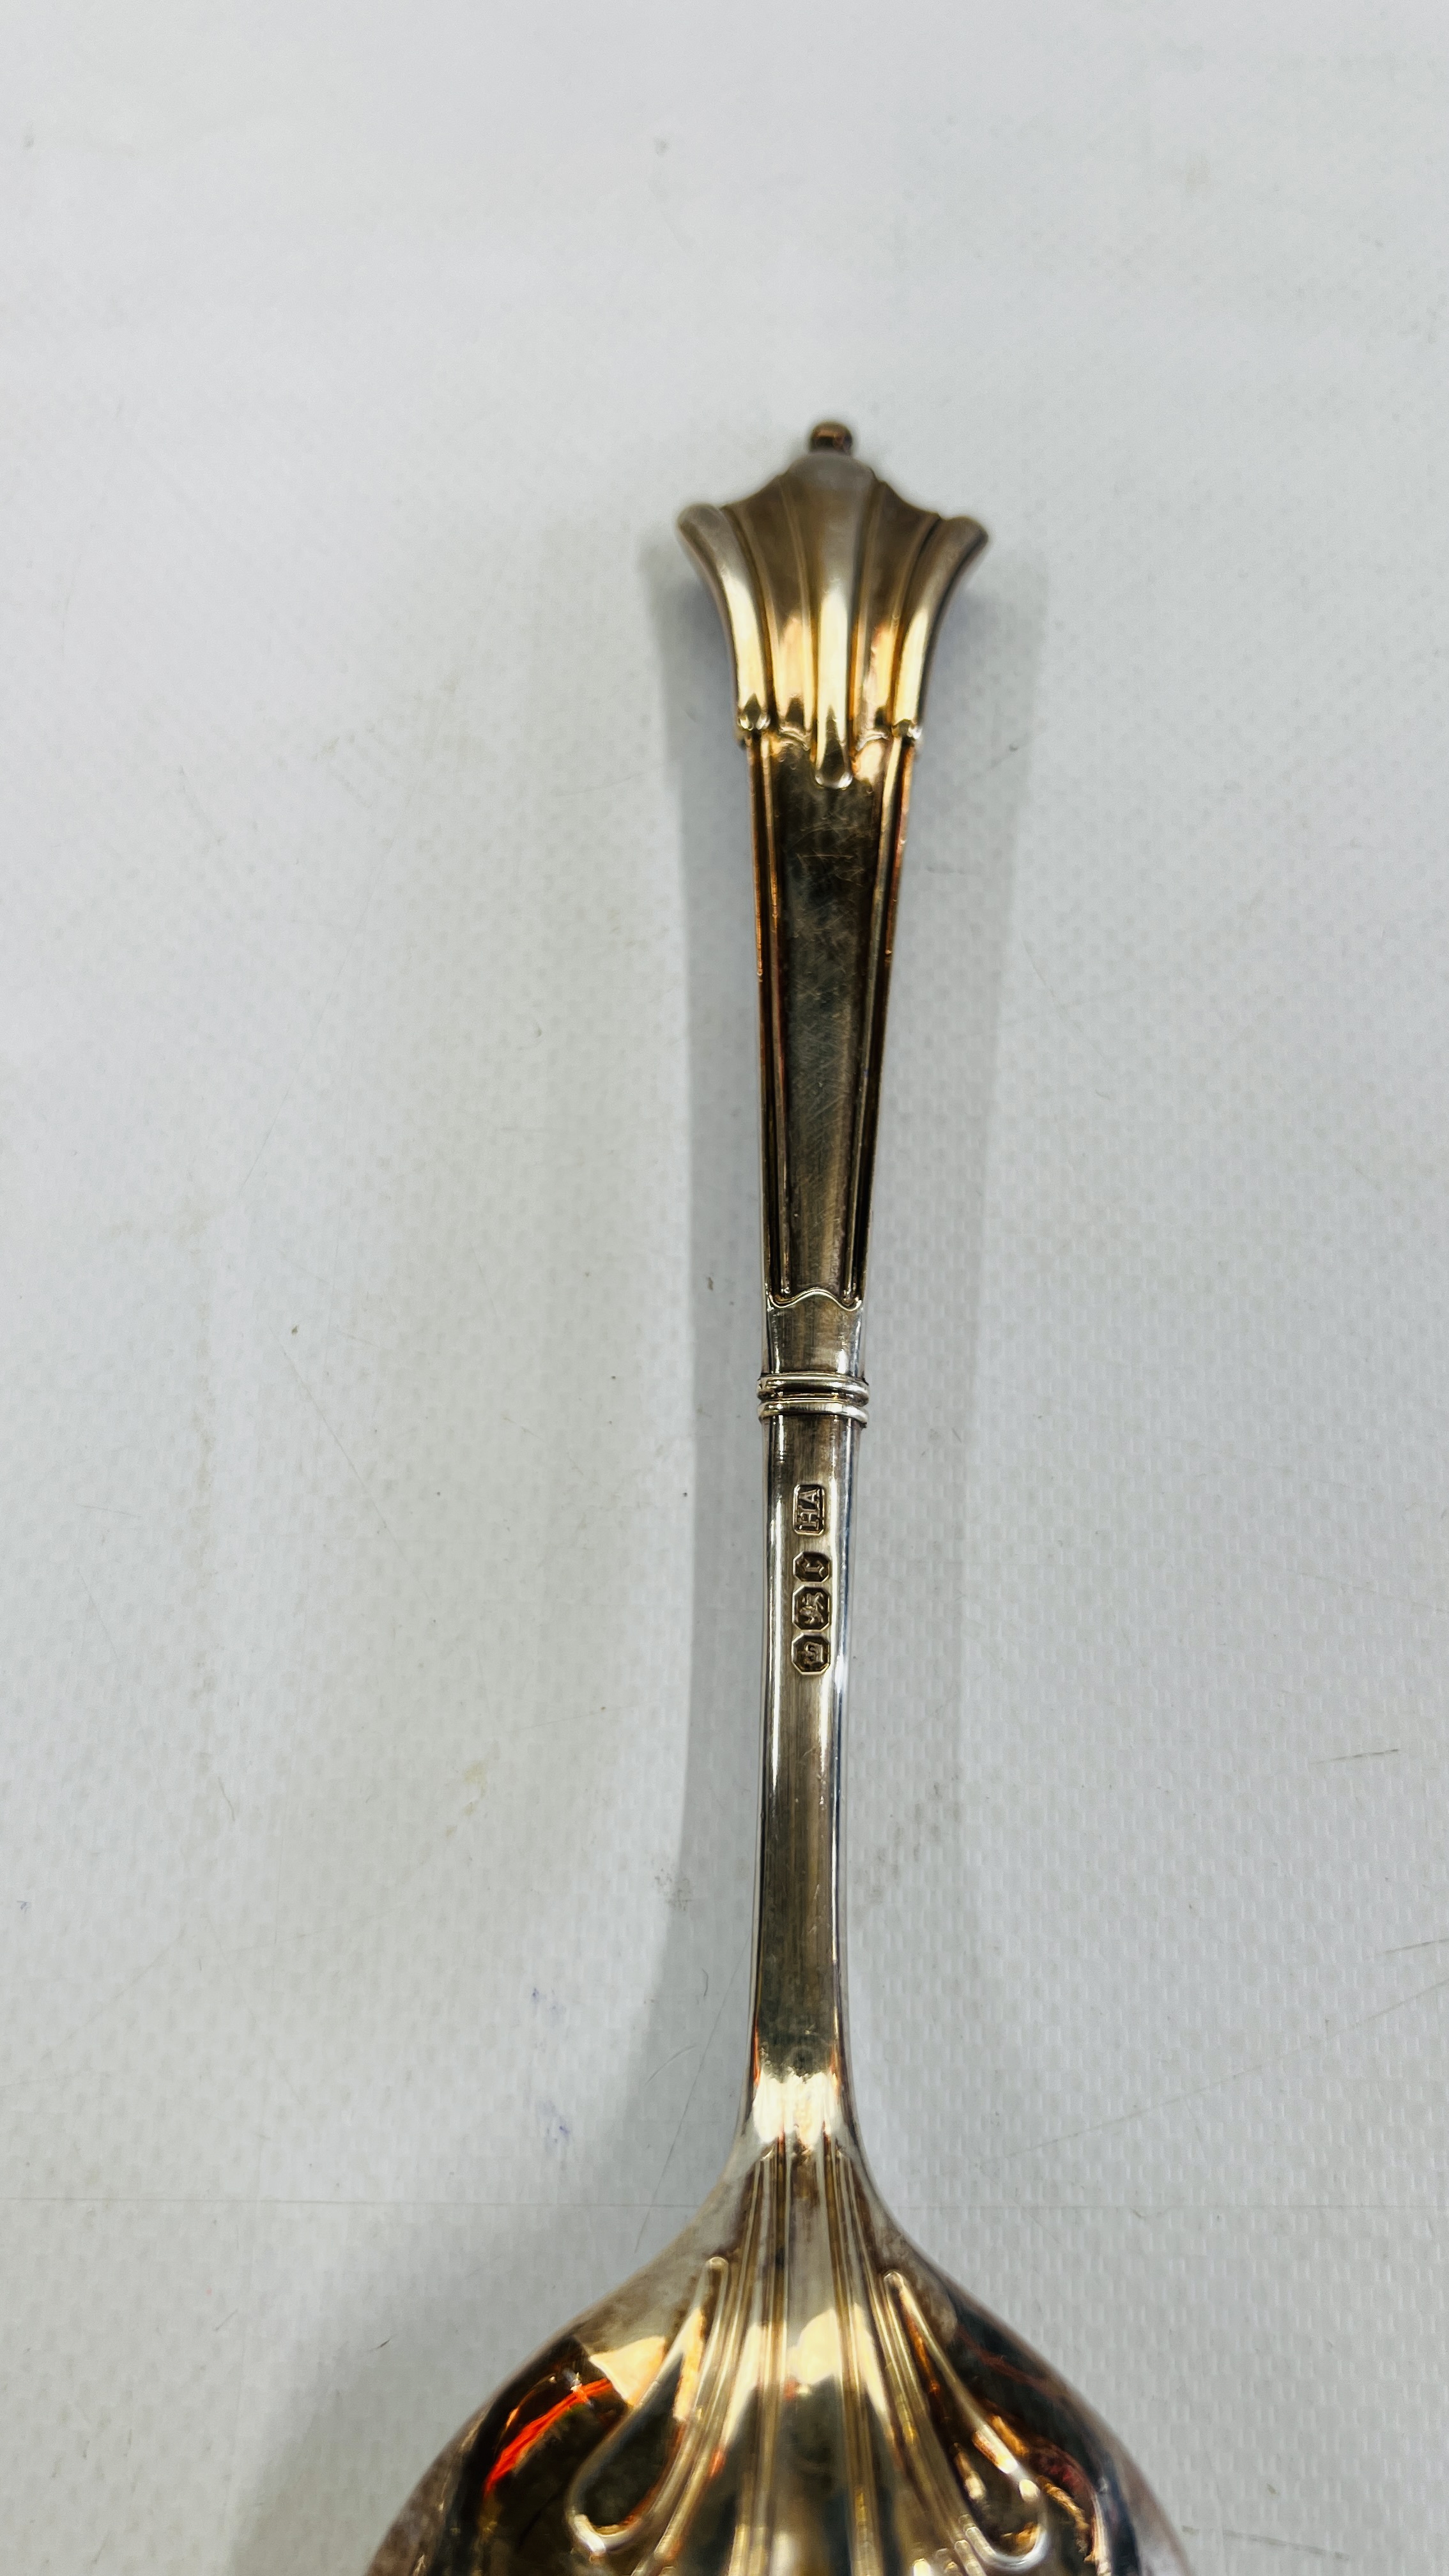 AN ANTIQUE VICTORIAN SILVER SPOON, SHEFFIELD ASSAY 1895, MAKER H. ATKINS - L 22.5CM. - Image 6 of 8